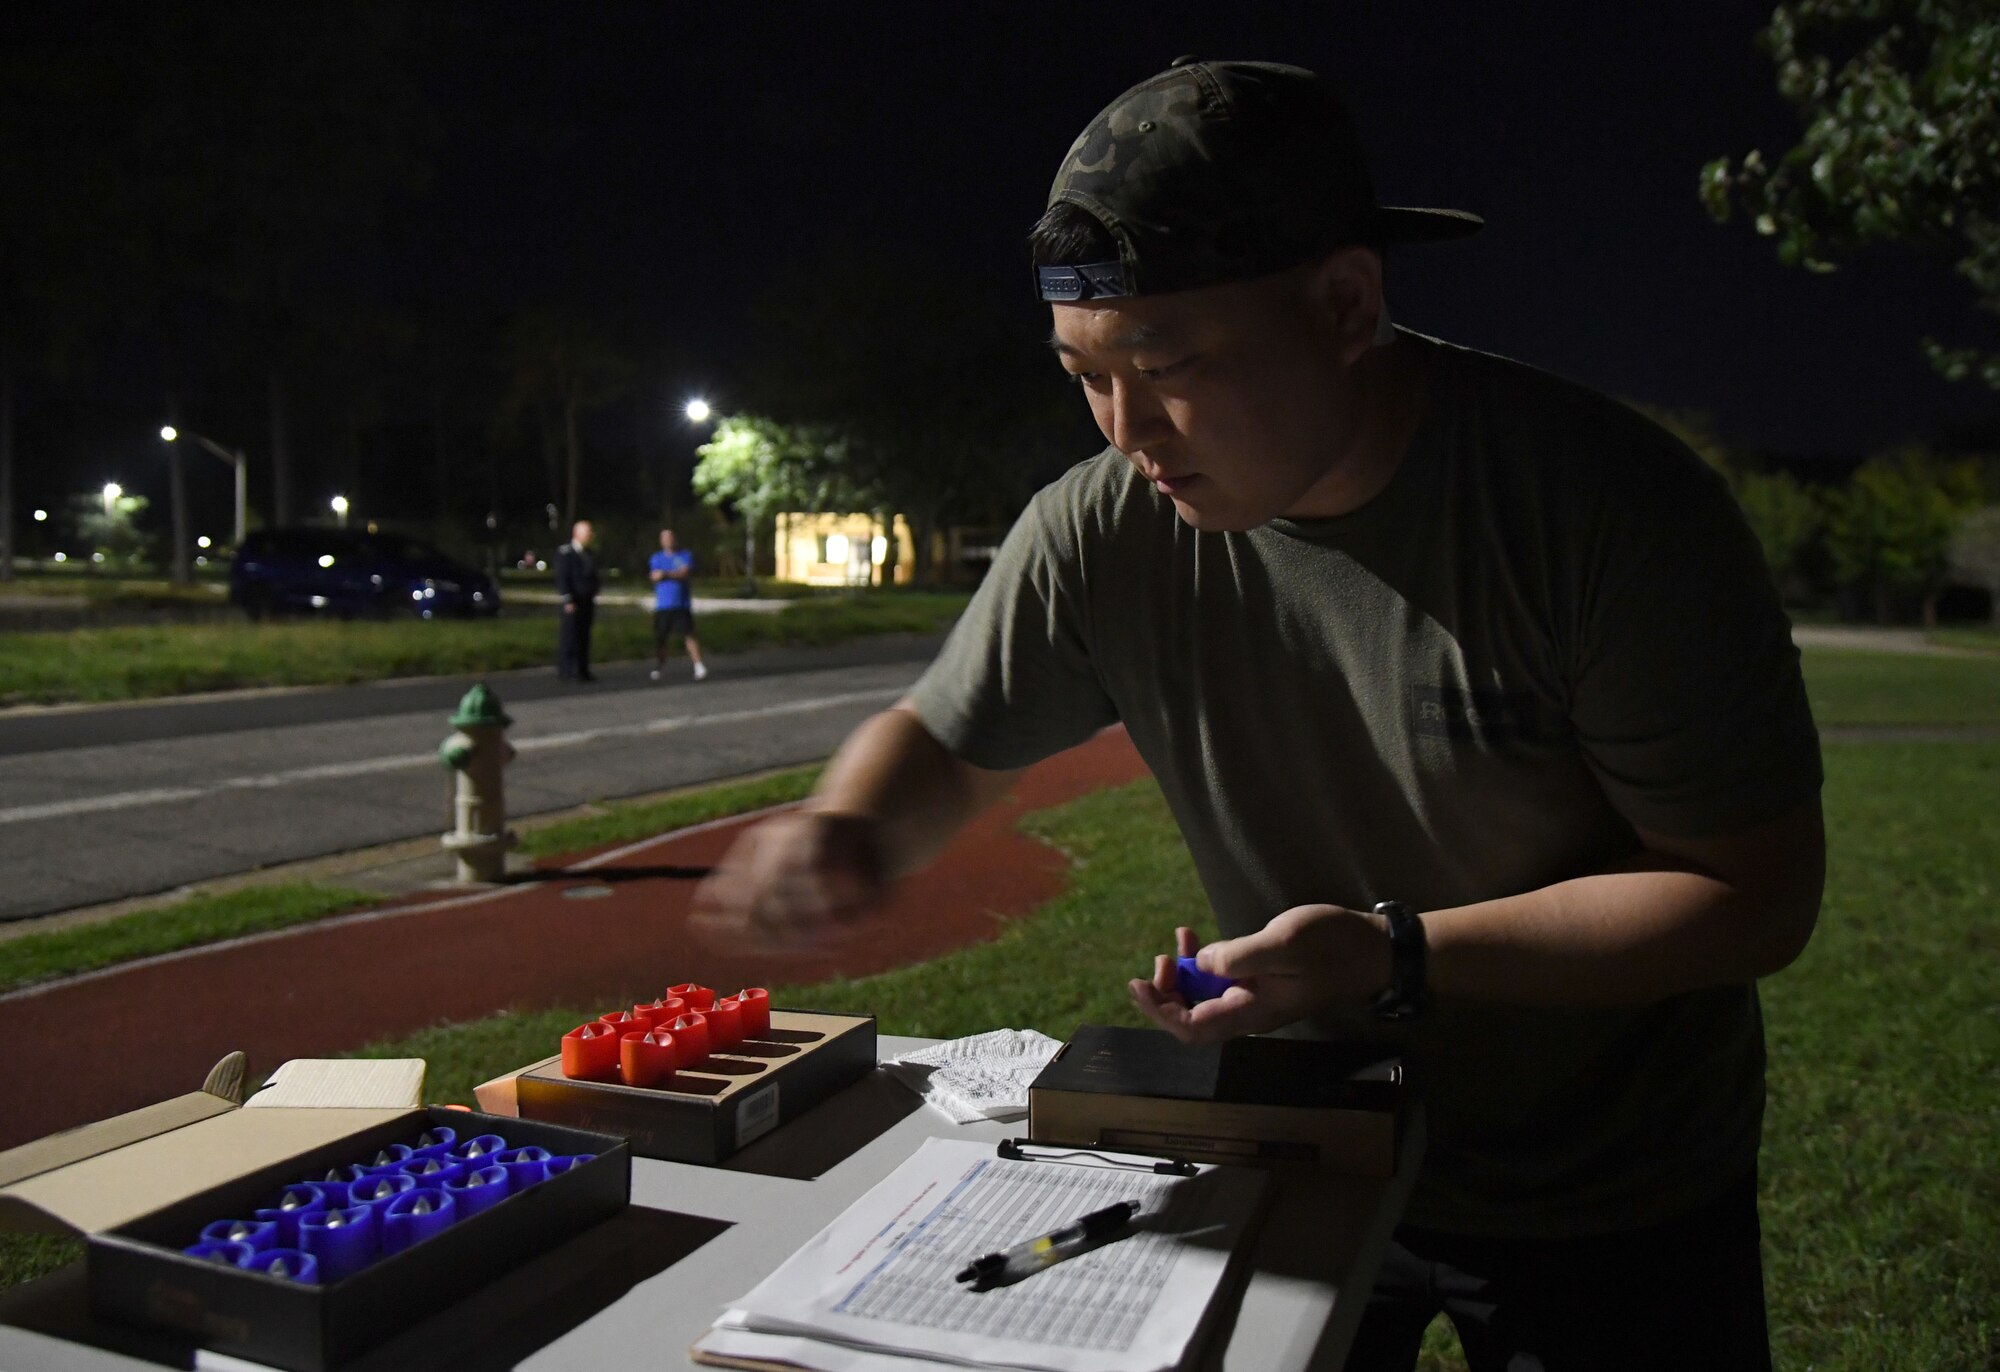 U.S. Air Force 2nd Lt. James Ro, 333rd Training Squadron student, prepares flameless candles for runners outside of Stennis Hall during the 2nd Annual 9/11 Memorial Run at Keesler Air Force Base, Mississippi, Sept. 10, 2021. The 24-hour run honored those who lost their lives during the 9/11 attacks. (U.S. Air Force photo by Kemberly Groue)